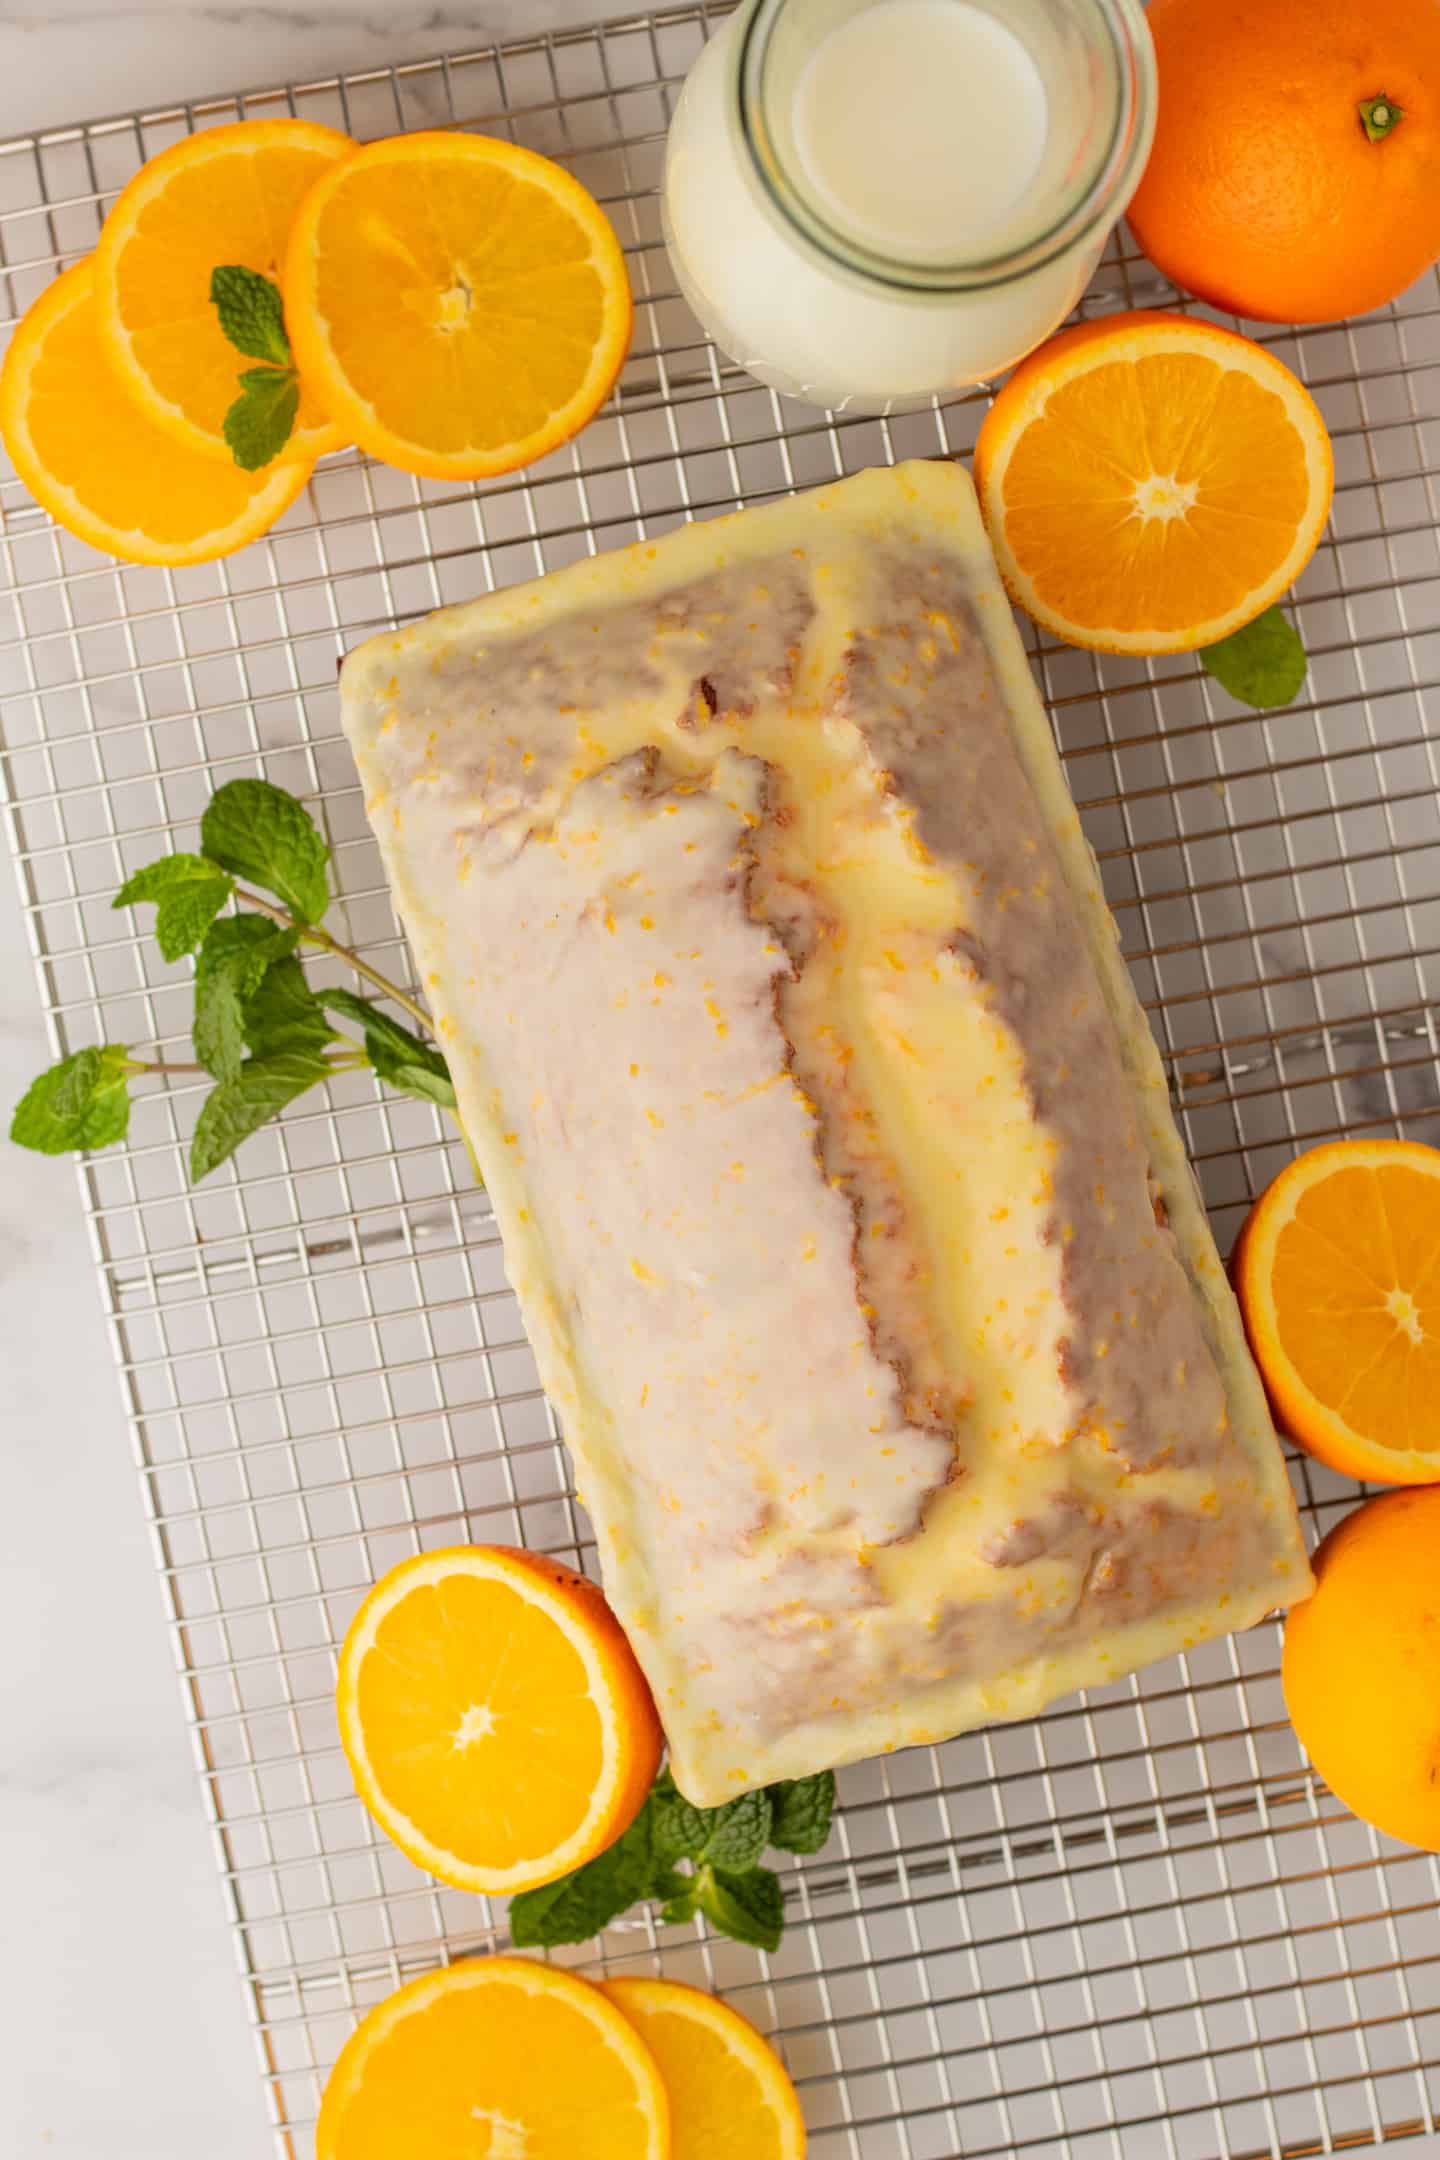 Let the cake cool completely before decorating it with a dusting of powdered sugar, orange slices, and mint leaves